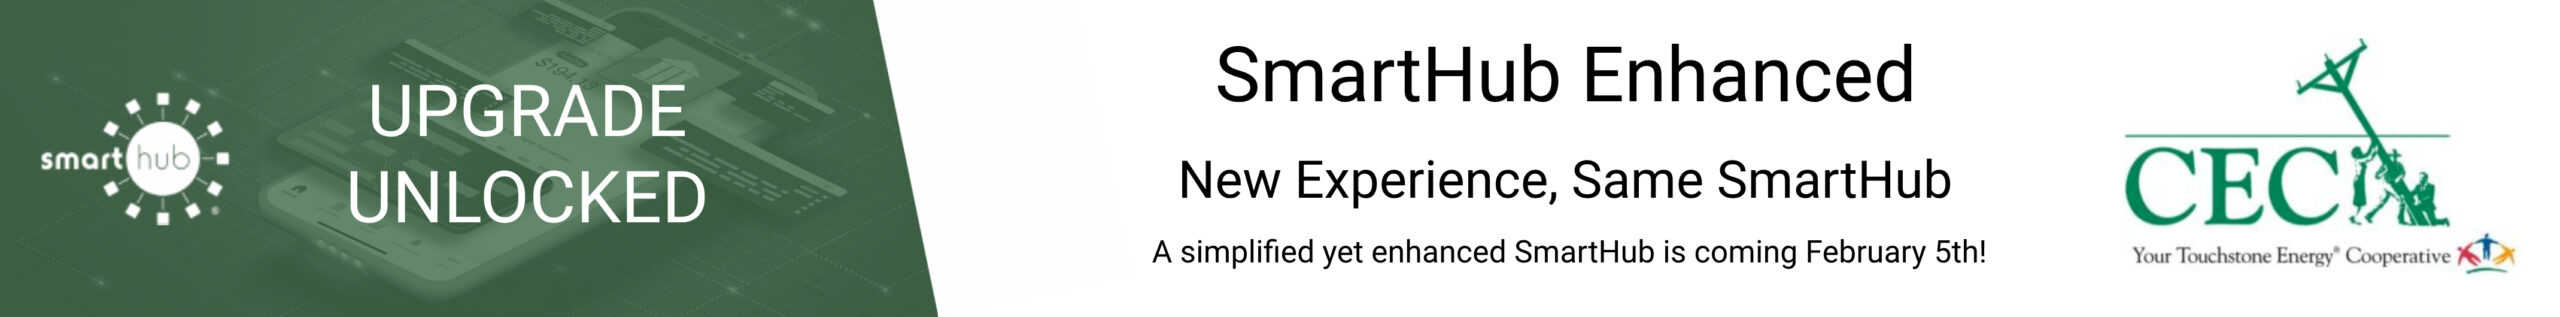 Banner announces SmartHub redesign is coming soon